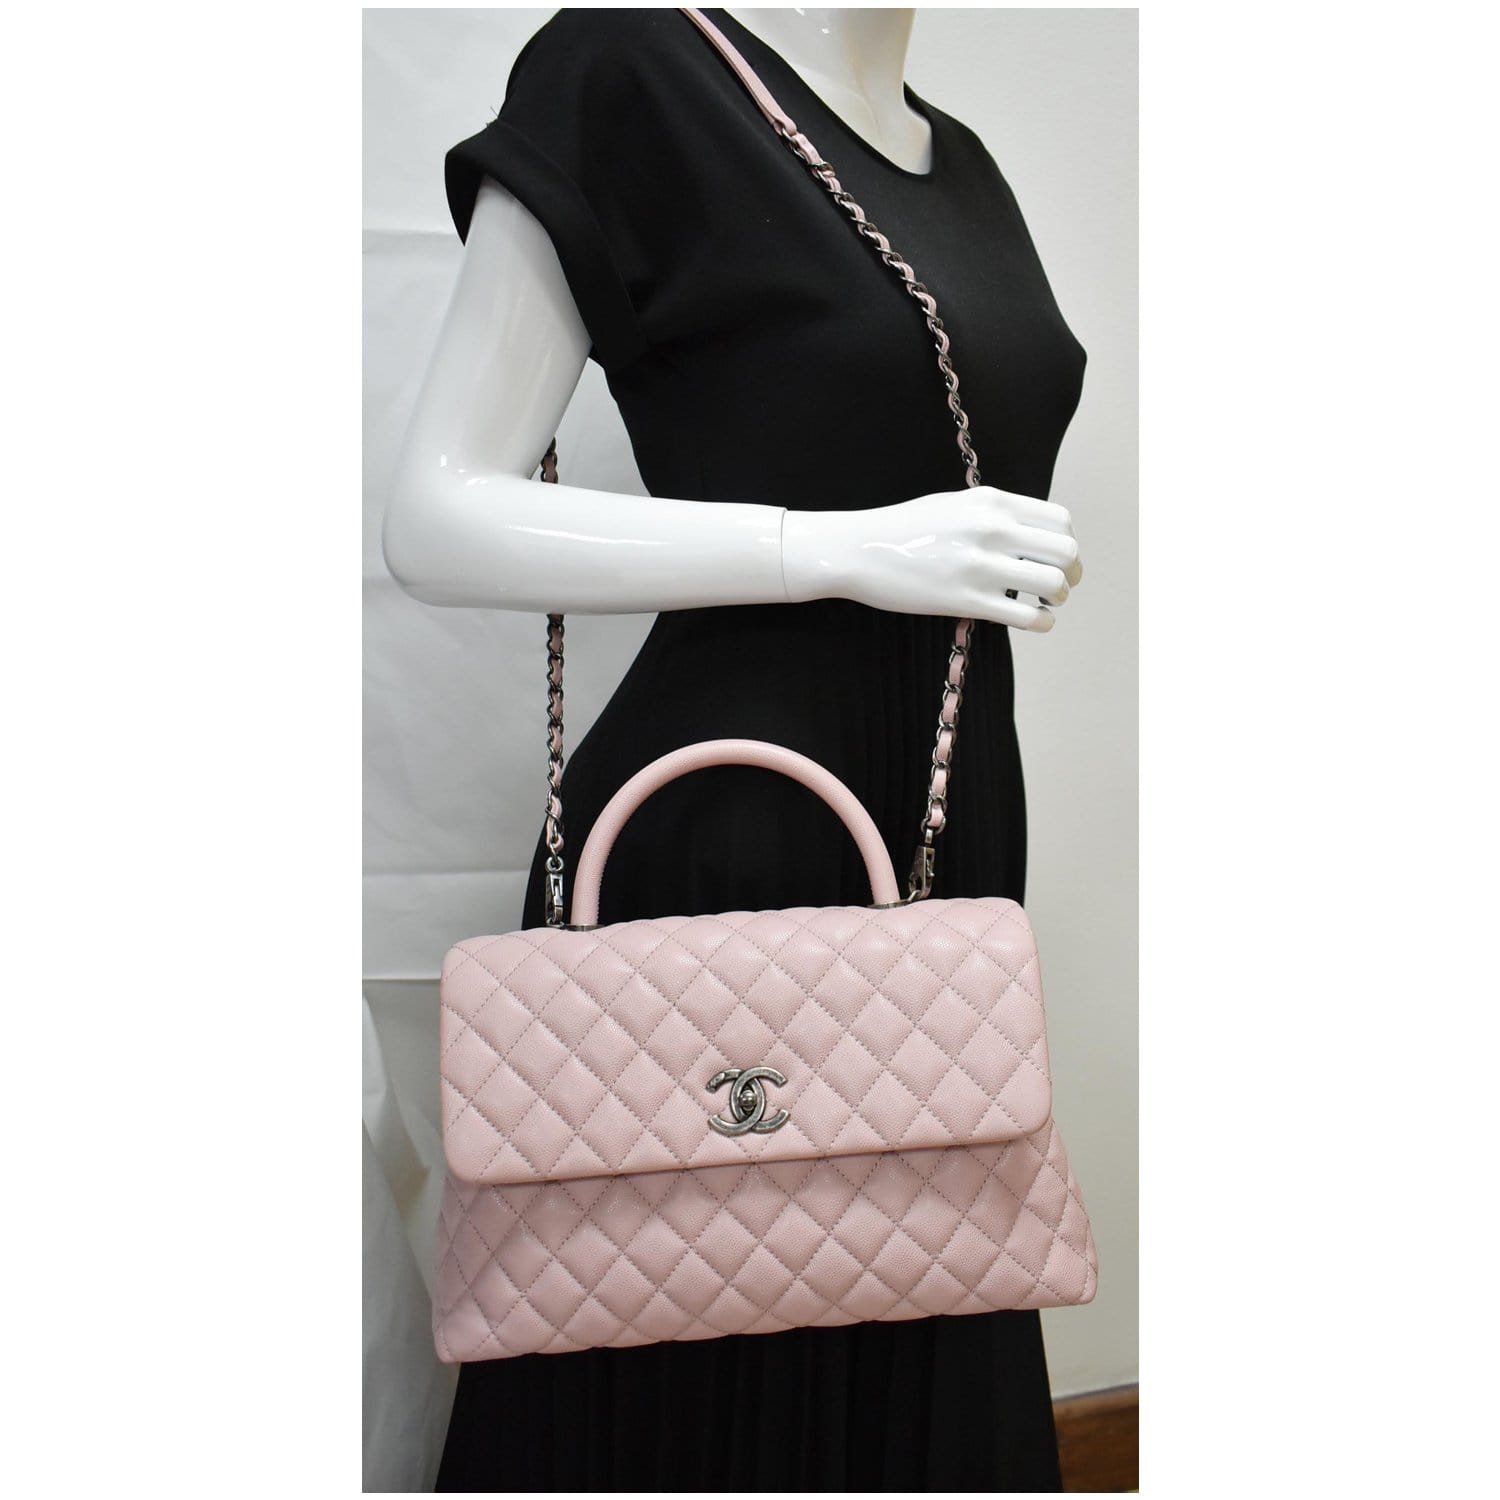 CHANEL Medium Coco Quilted Caviar Leather Top Handle Shoulder Bag Pink